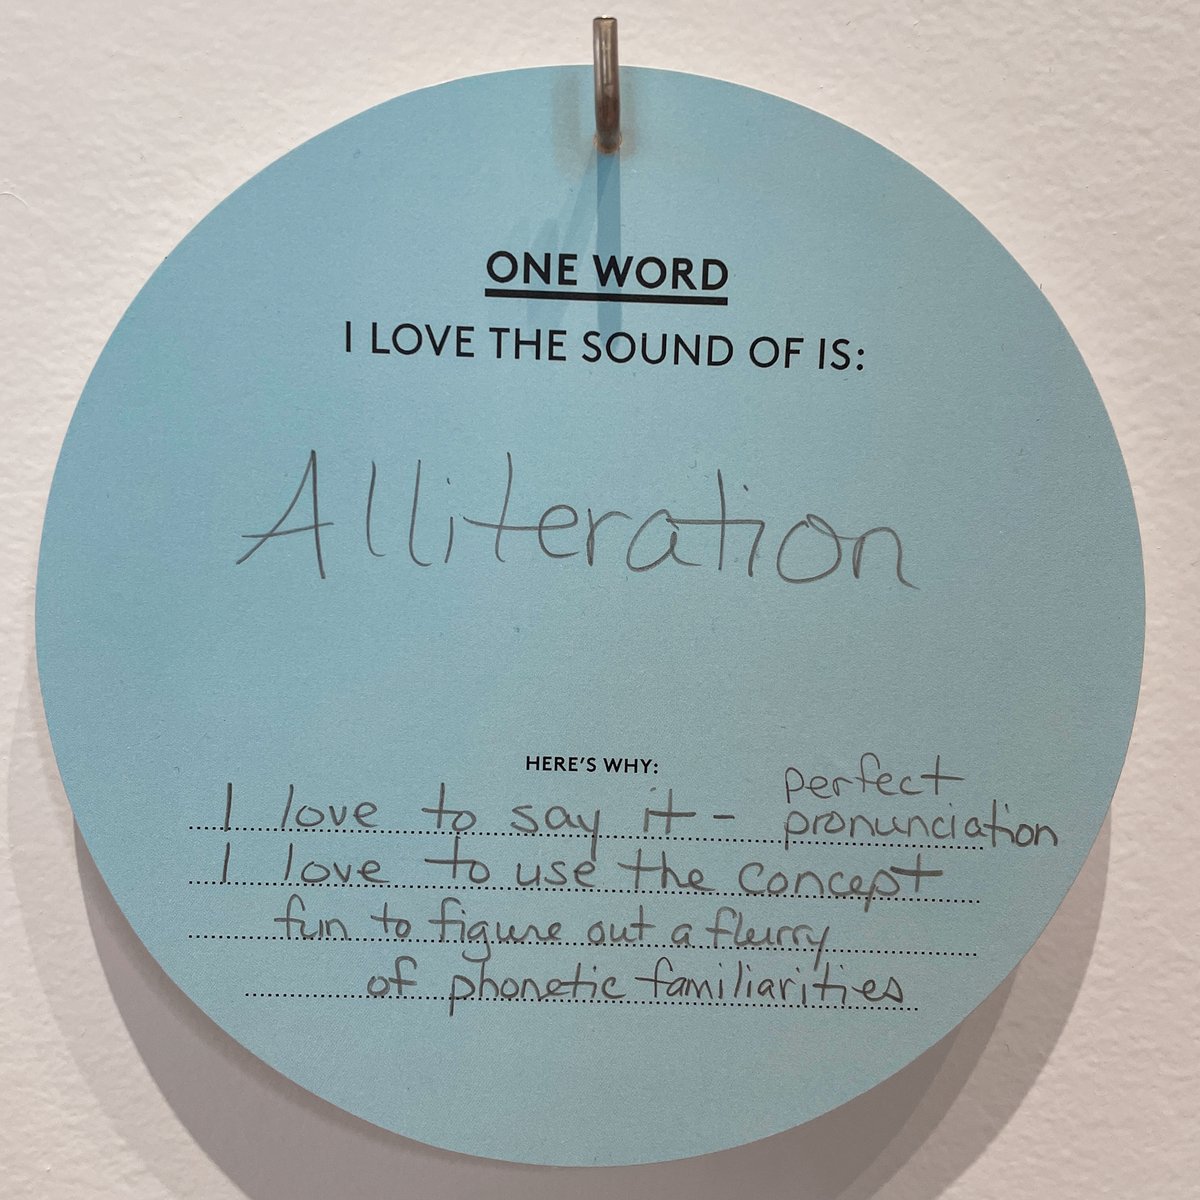 Does the word “alliteration” make you feel merry? Maybe “mellifluous” is music to your ears, or you have a soft spot for the much-maligned “moist.” In the Words Matter gallery, answer up to eight prompts and share the words that are most meaningful to you with other visitors.